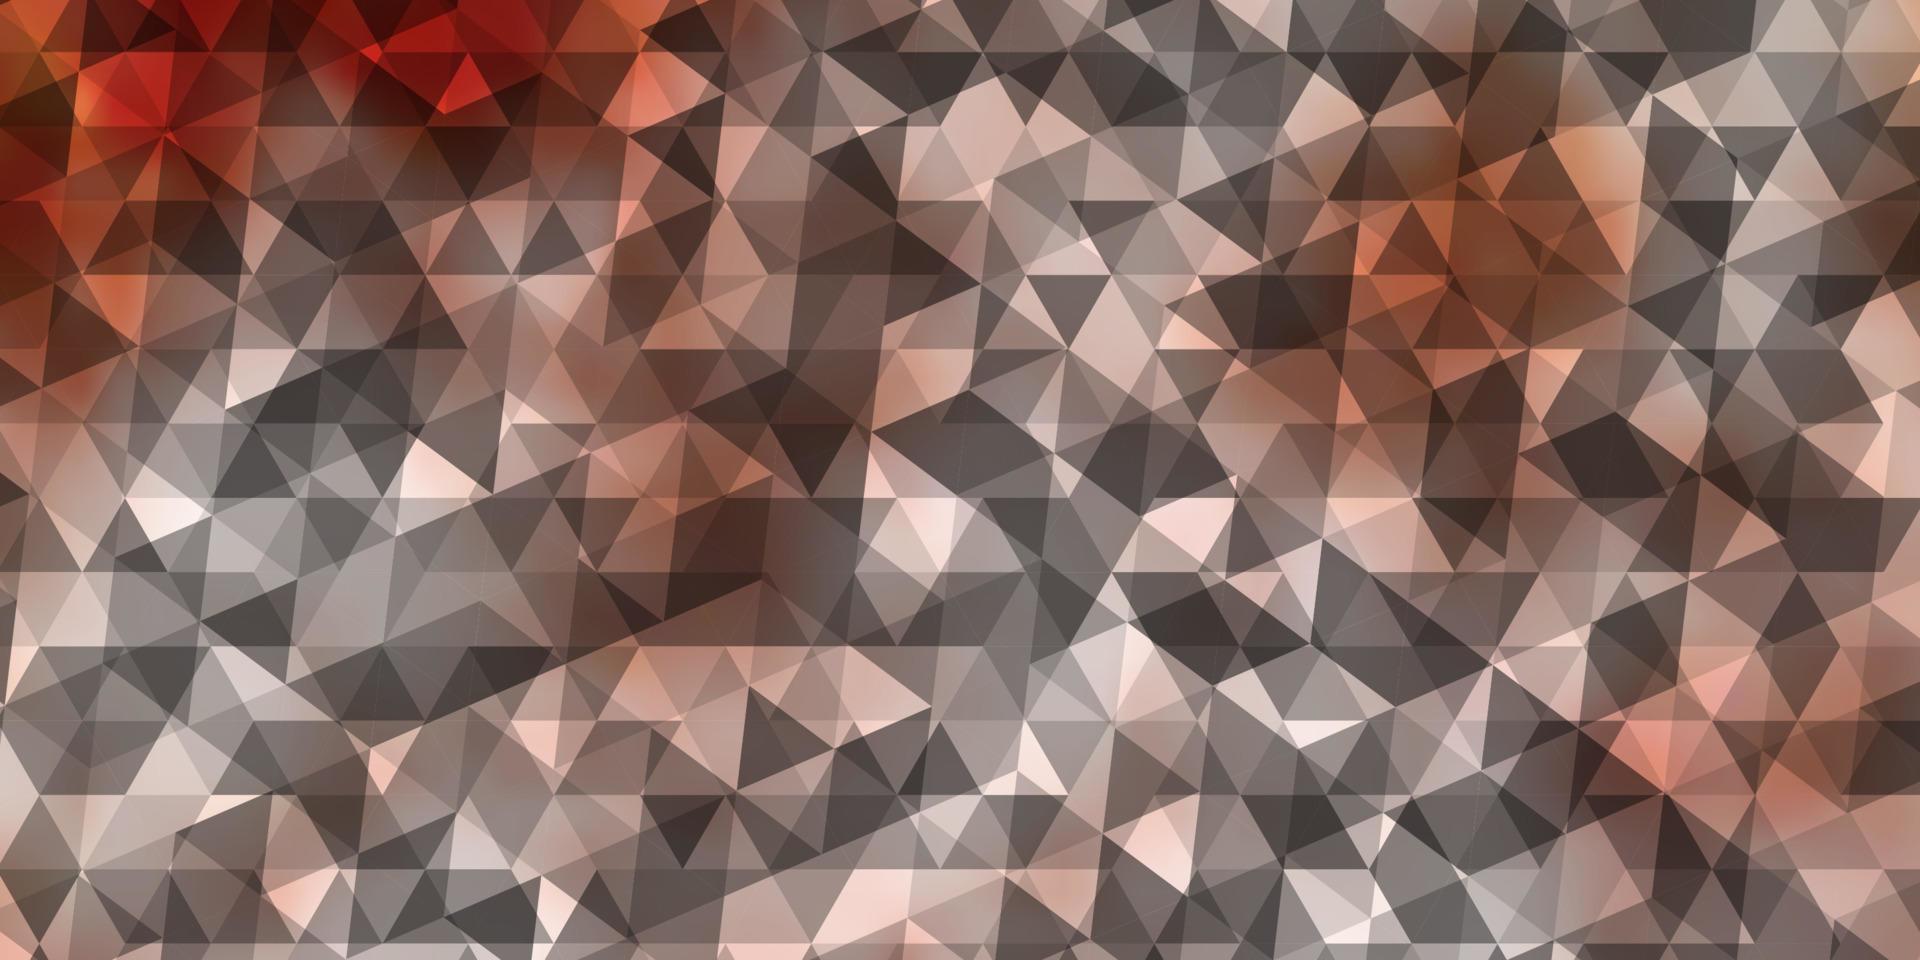 Light Red vector background with polygonal style.